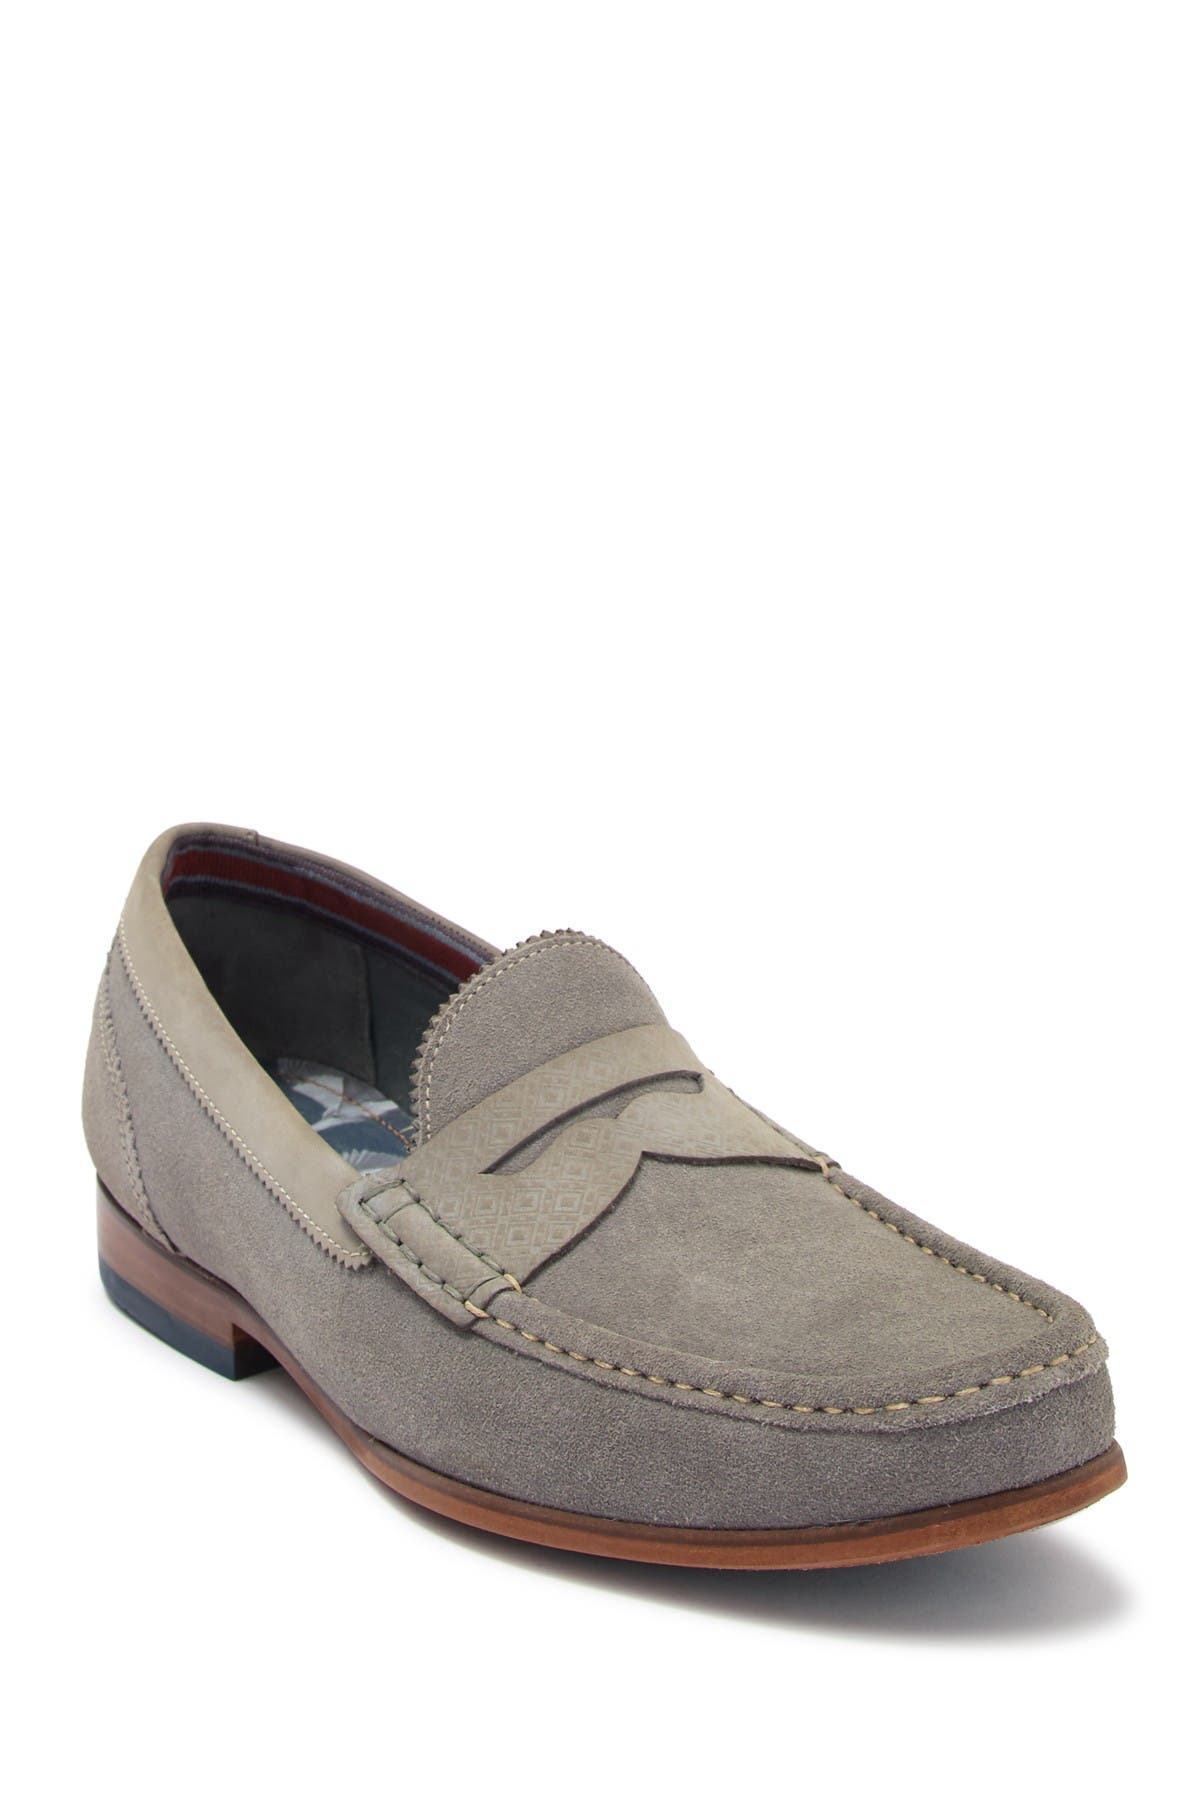 ted baker suede loafers